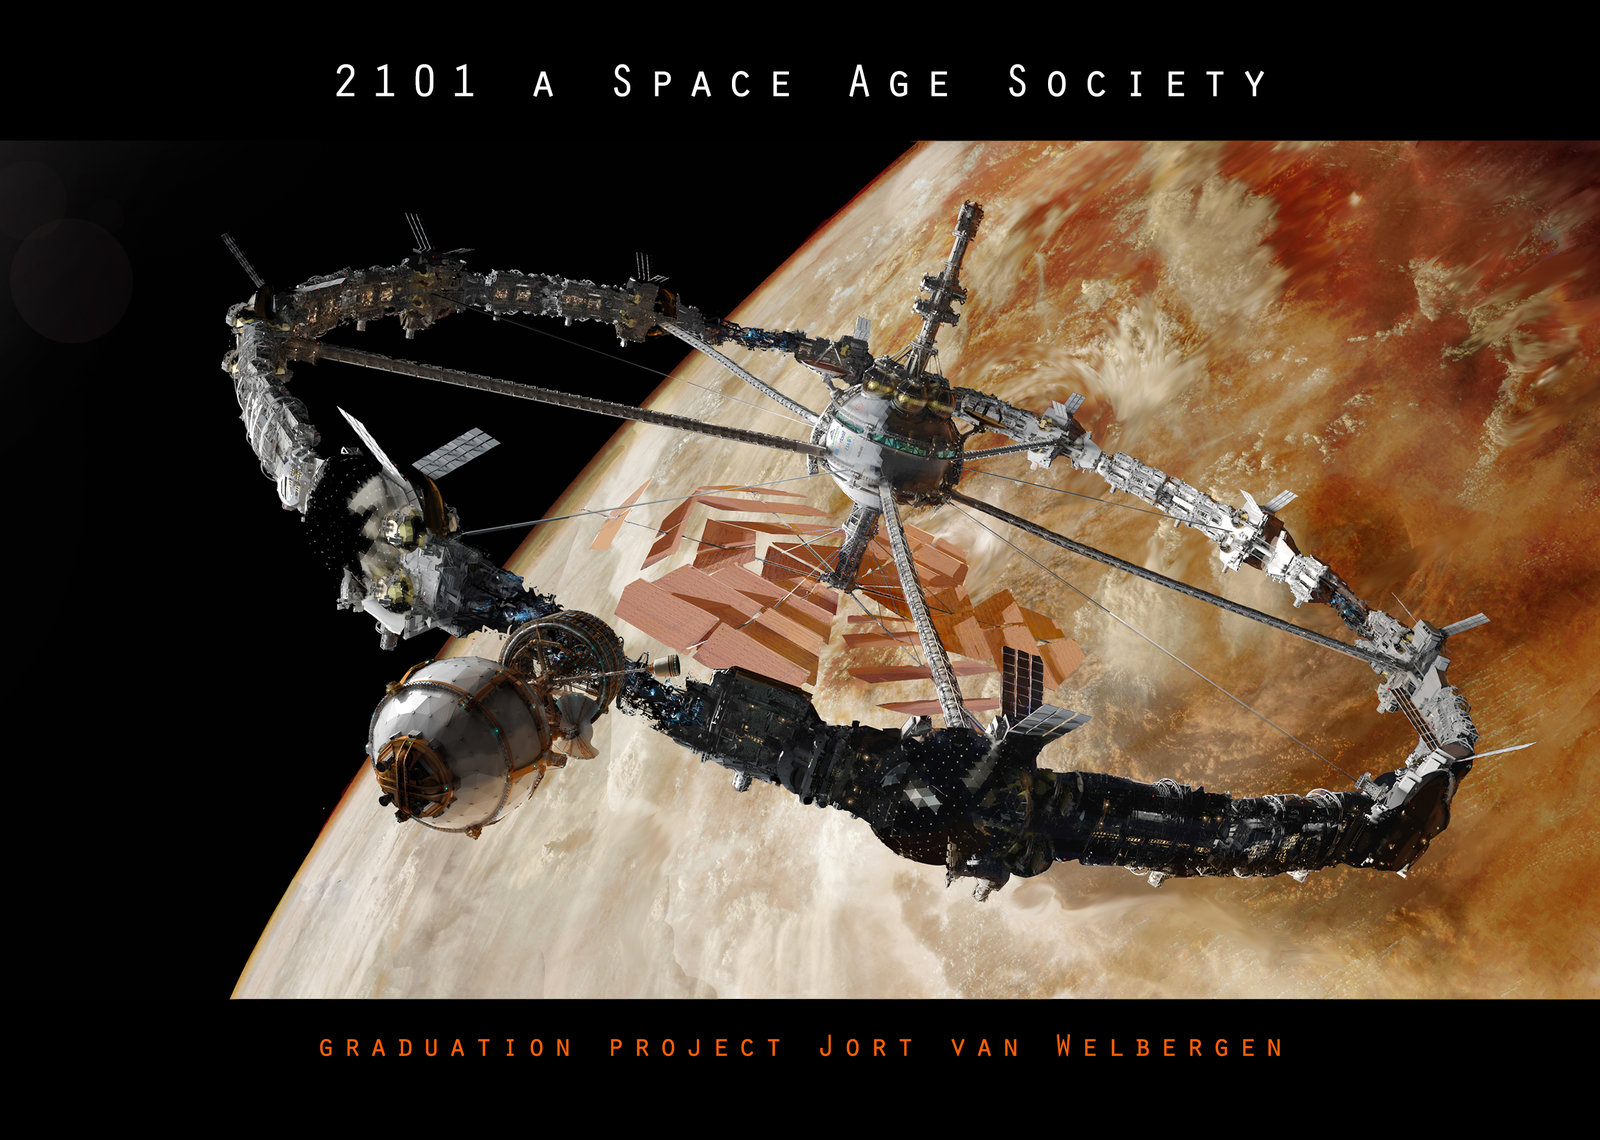 2101 a space age society flyer